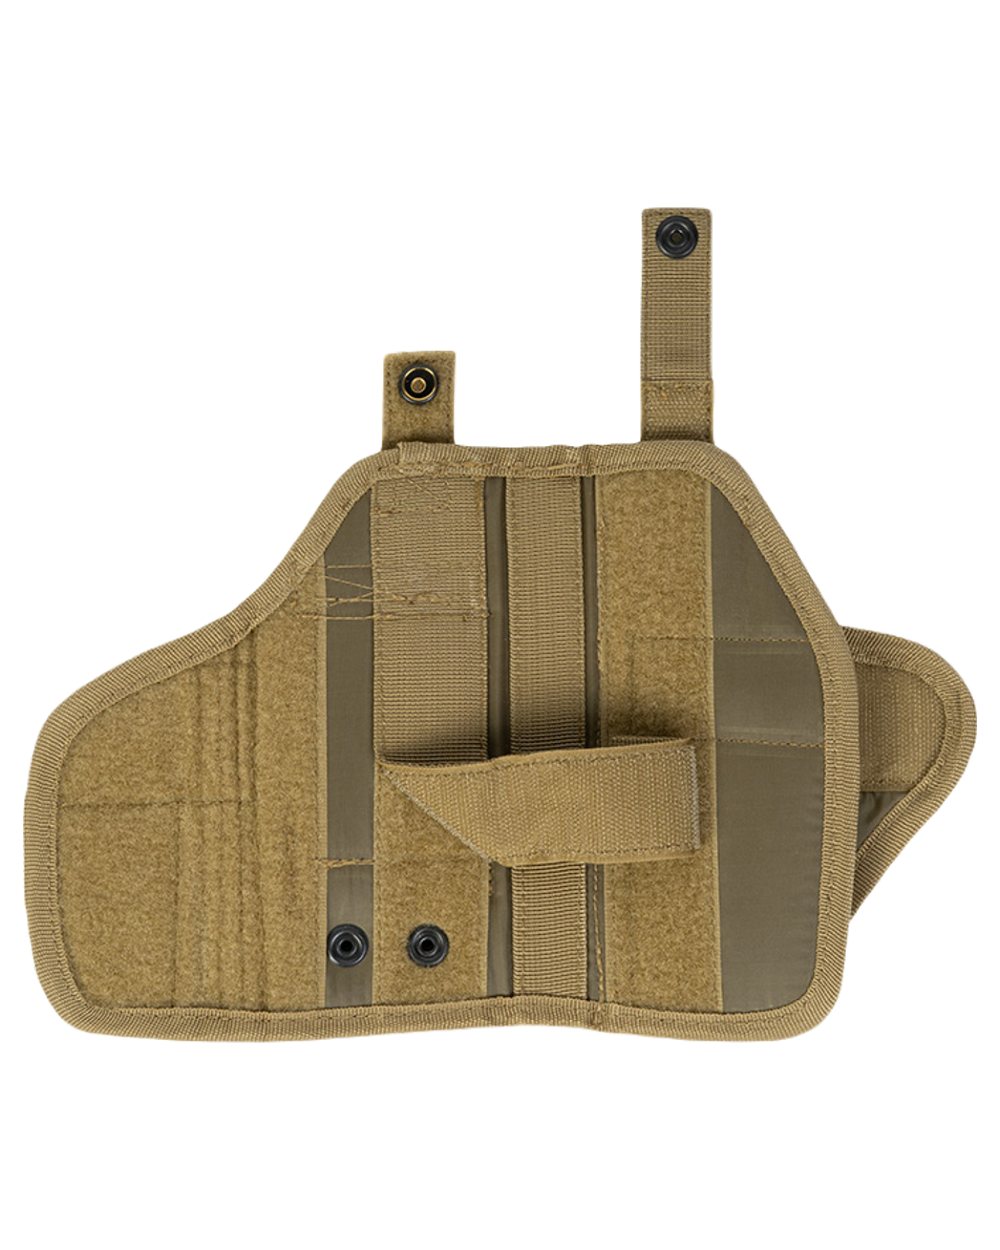 Viper Modular Adjustable Holster In Coyote 